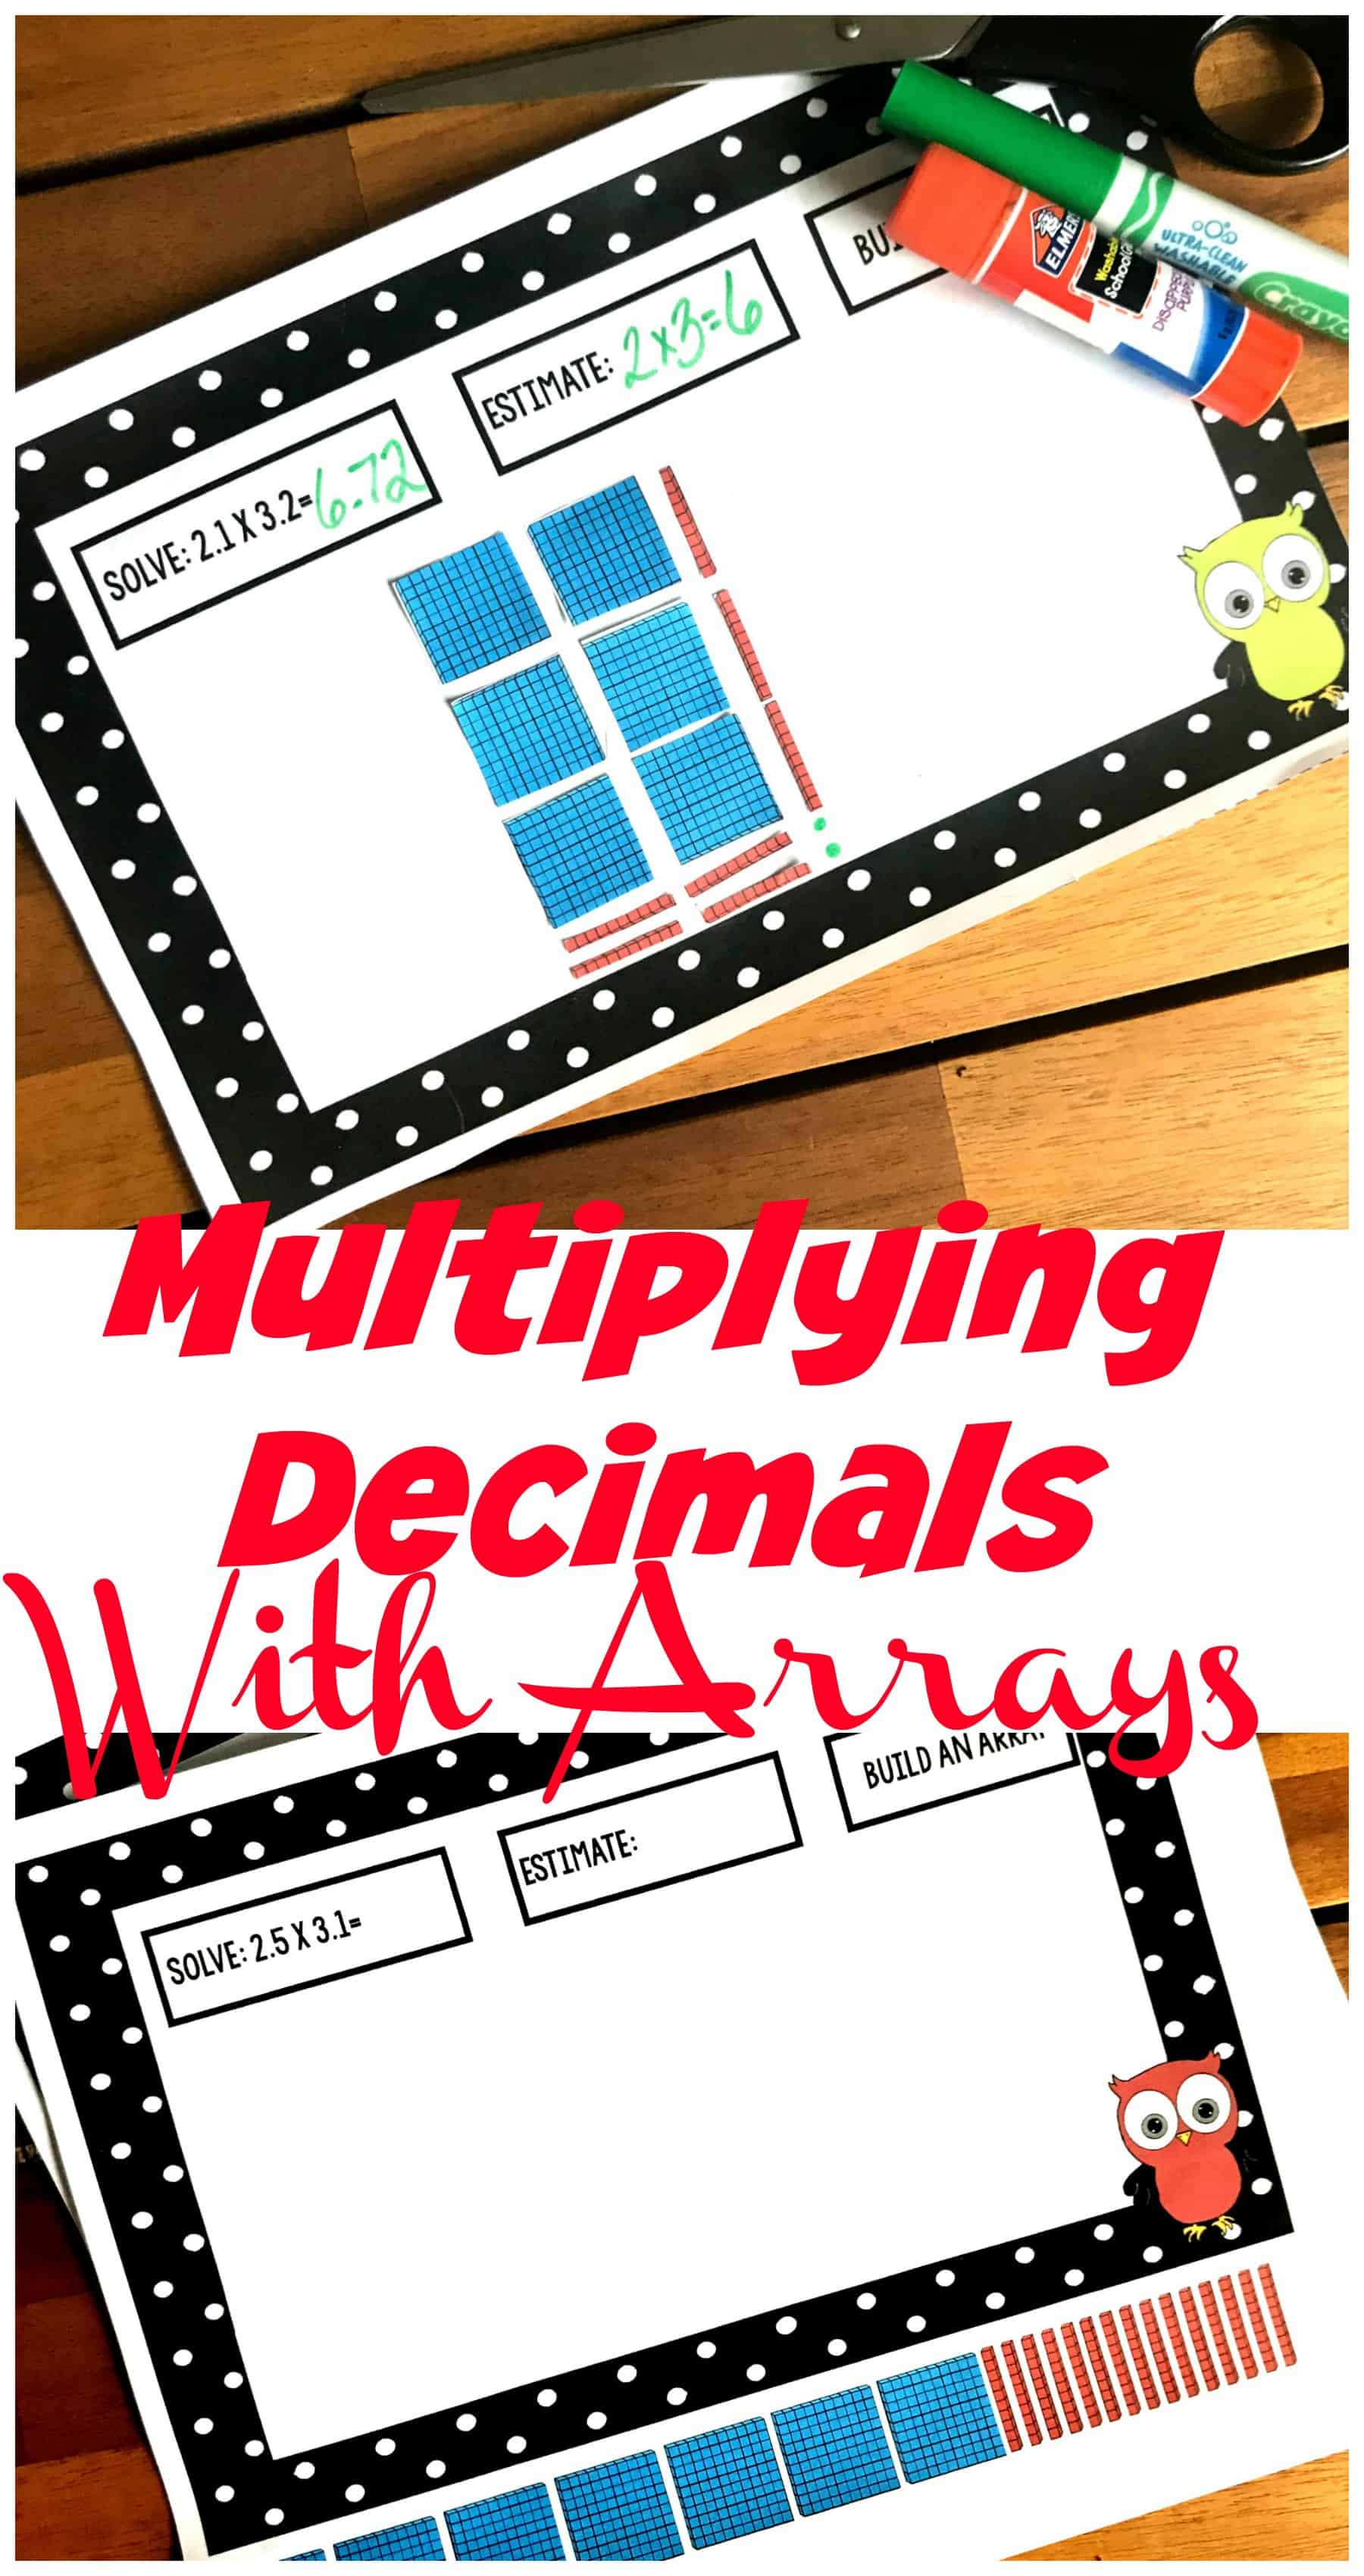 How to Model Multiplying Decimals With Arrays (Free Printable)